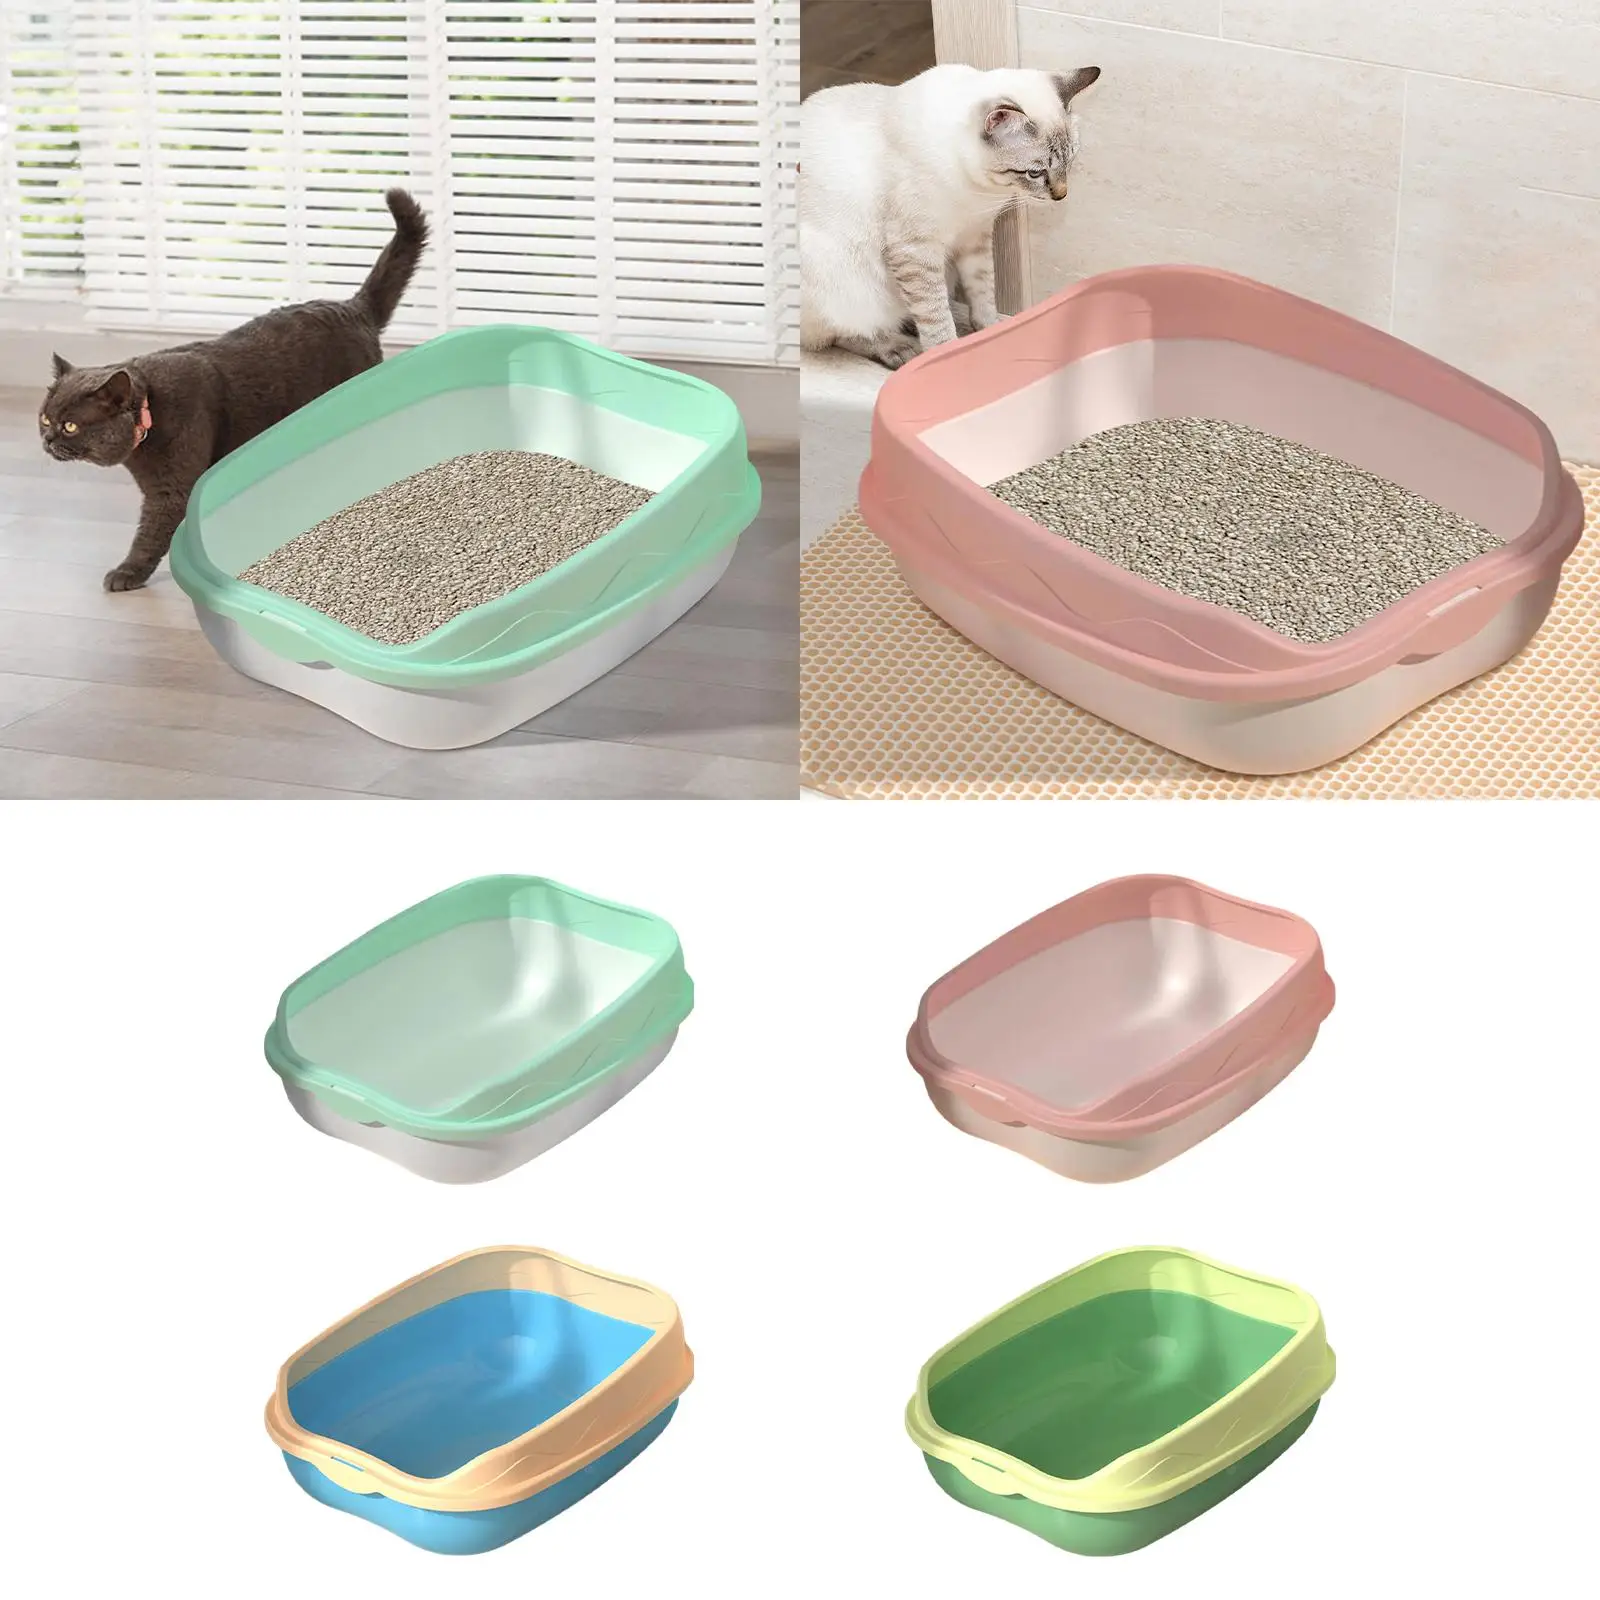 Cat Litter Box Plastic Scatter Shield Easy to Clean Large Sturdy High Sided Cat Bedpan Semi Enclosed Open Top Cat Toilet Kitty